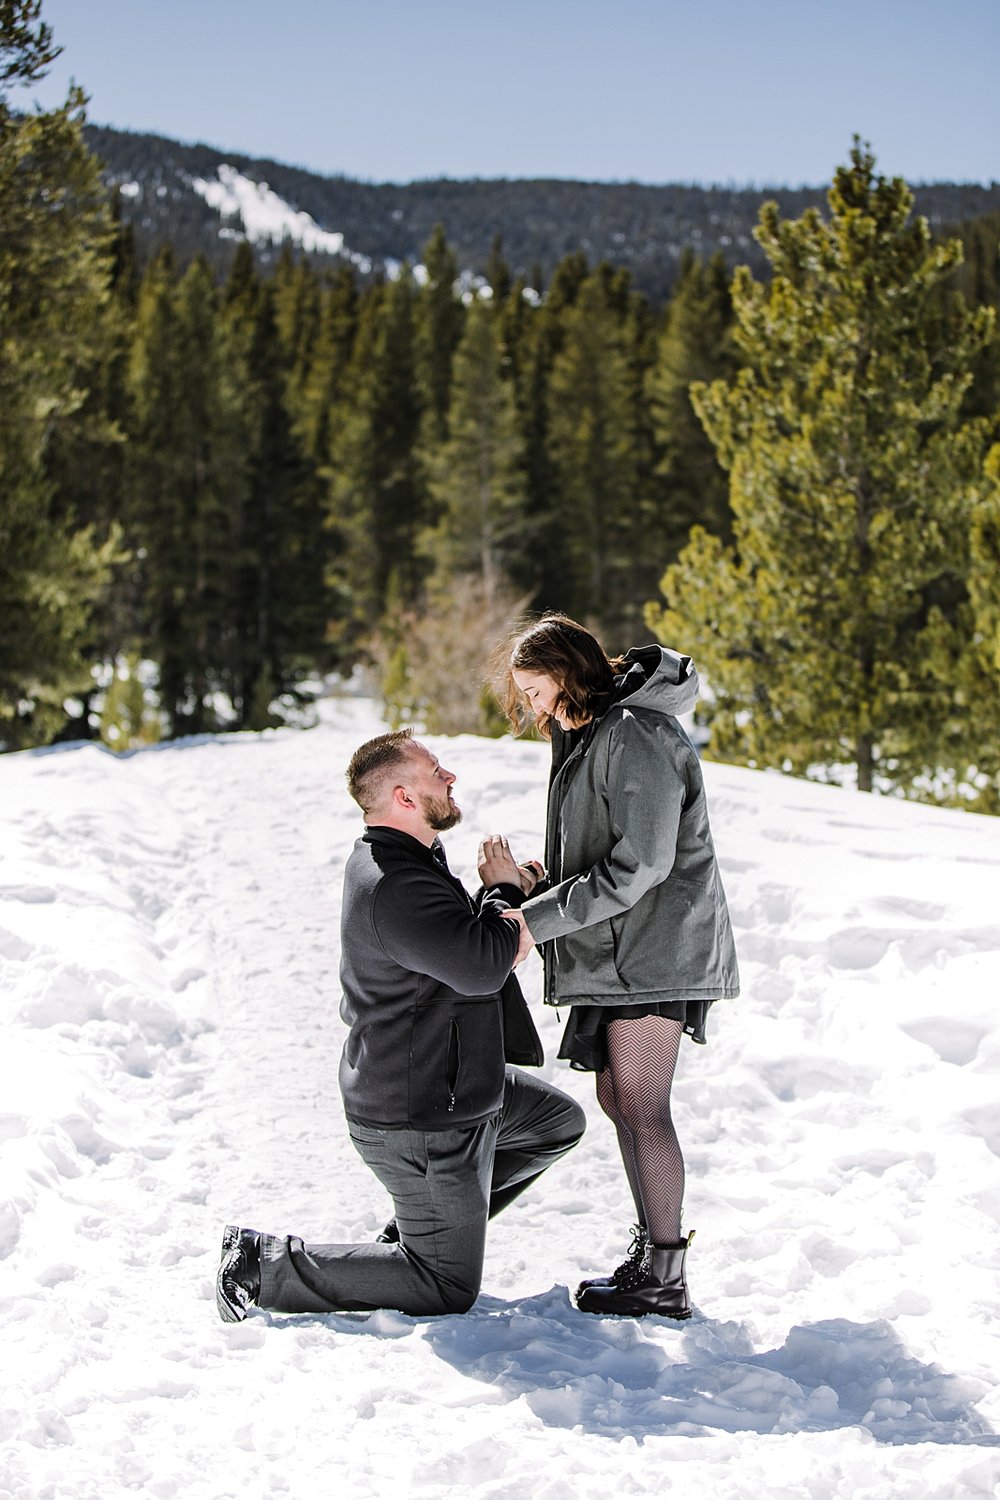 man proposing in the snow, winter engagement, breckenridge snowy engagements, breckenridge winter engagements, snowy proposal, christmas engagement, christmas proposal, colorado winter activities